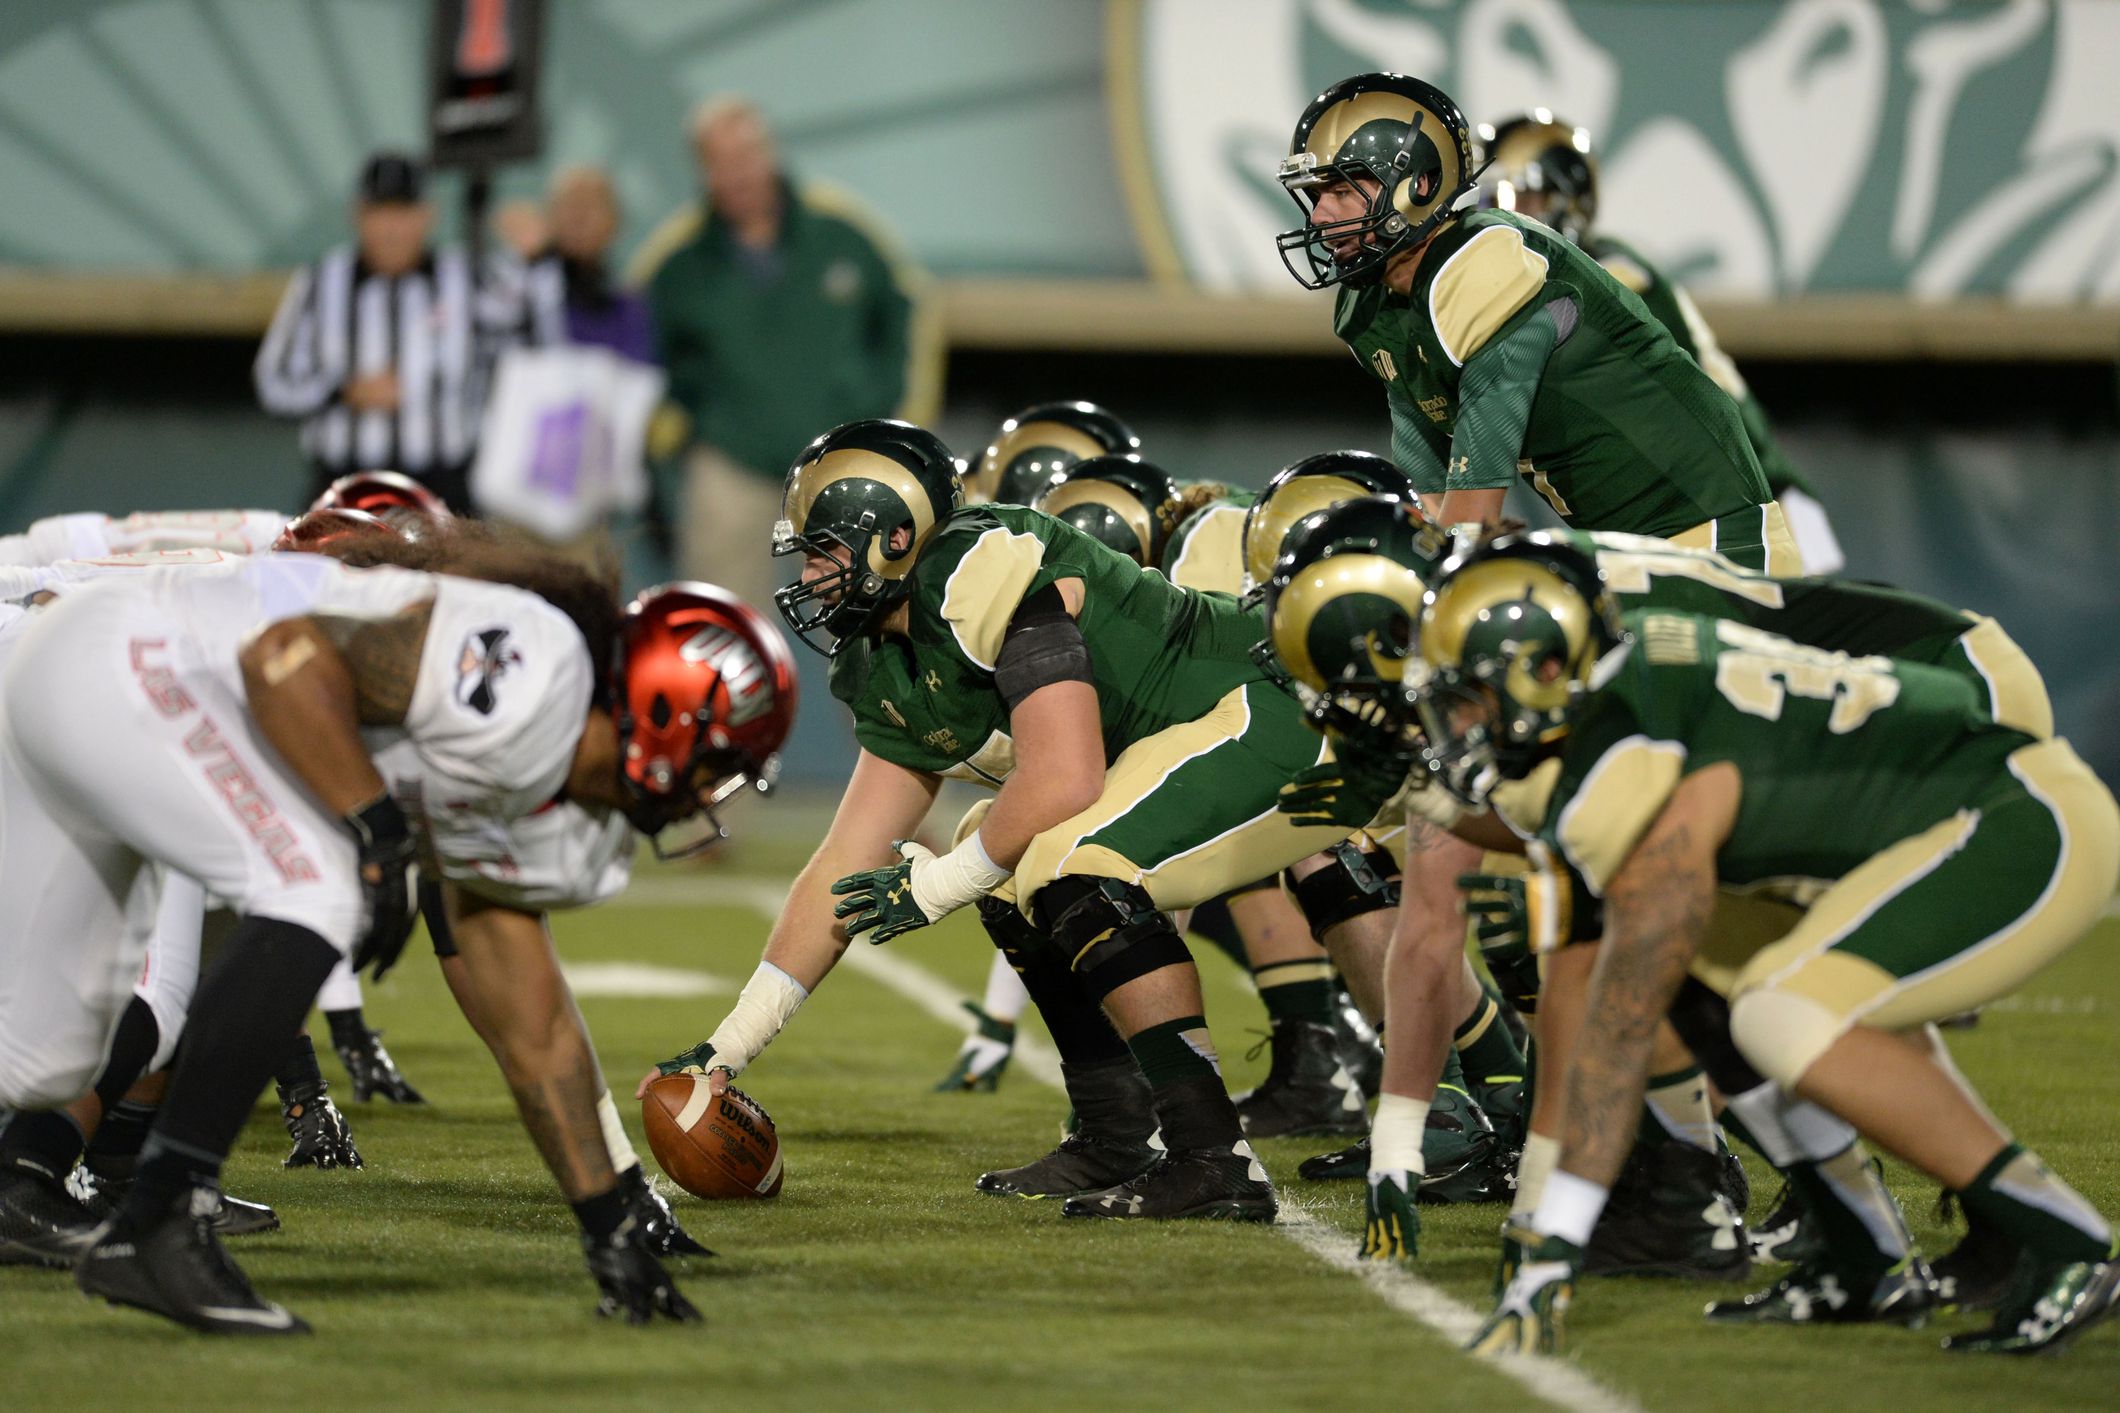 Colorado State is investing in its football future, but 2016 might be a